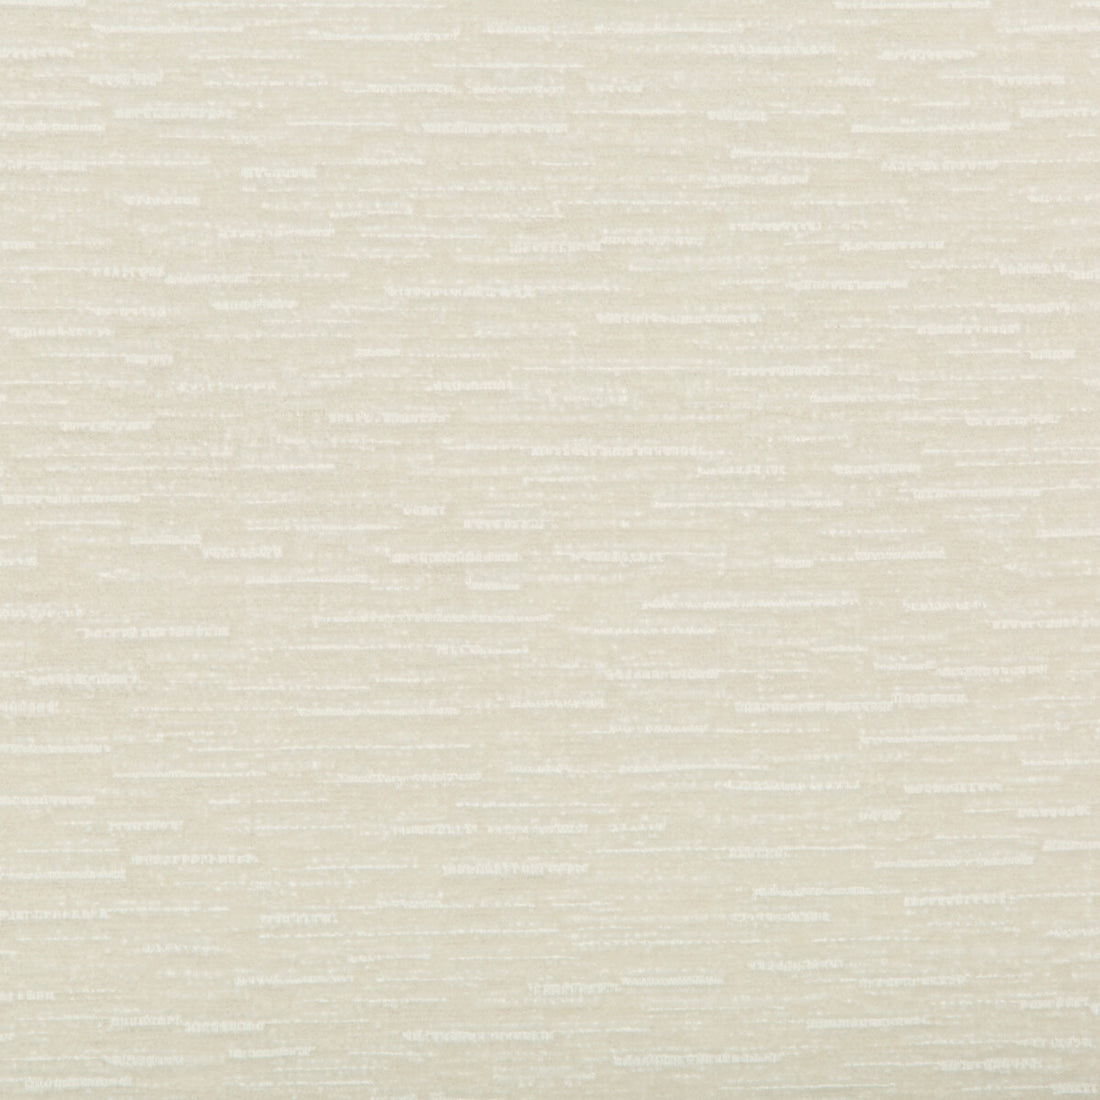 Kravet Smart fabric in 34731-101 color - pattern 34731.101.0 - by Kravet Smart in the Performance collection